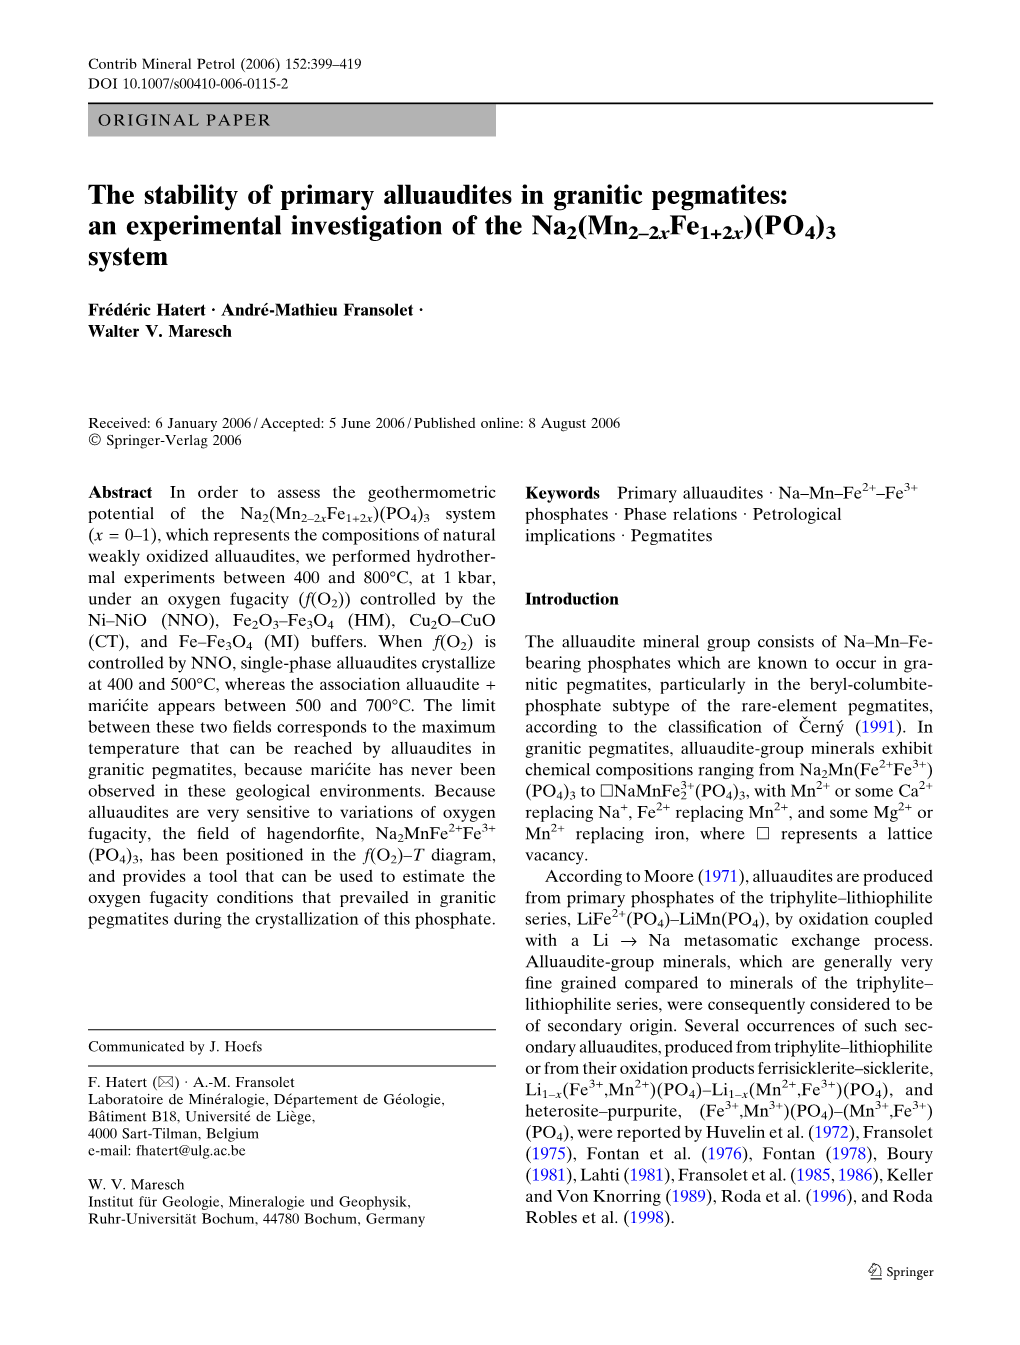 The Stability of Primary Alluaudites in Granitic Pegmatites: an Experimental Investigation of the Na2(Mn2–2Xfe1+2X)(PO4)3 System